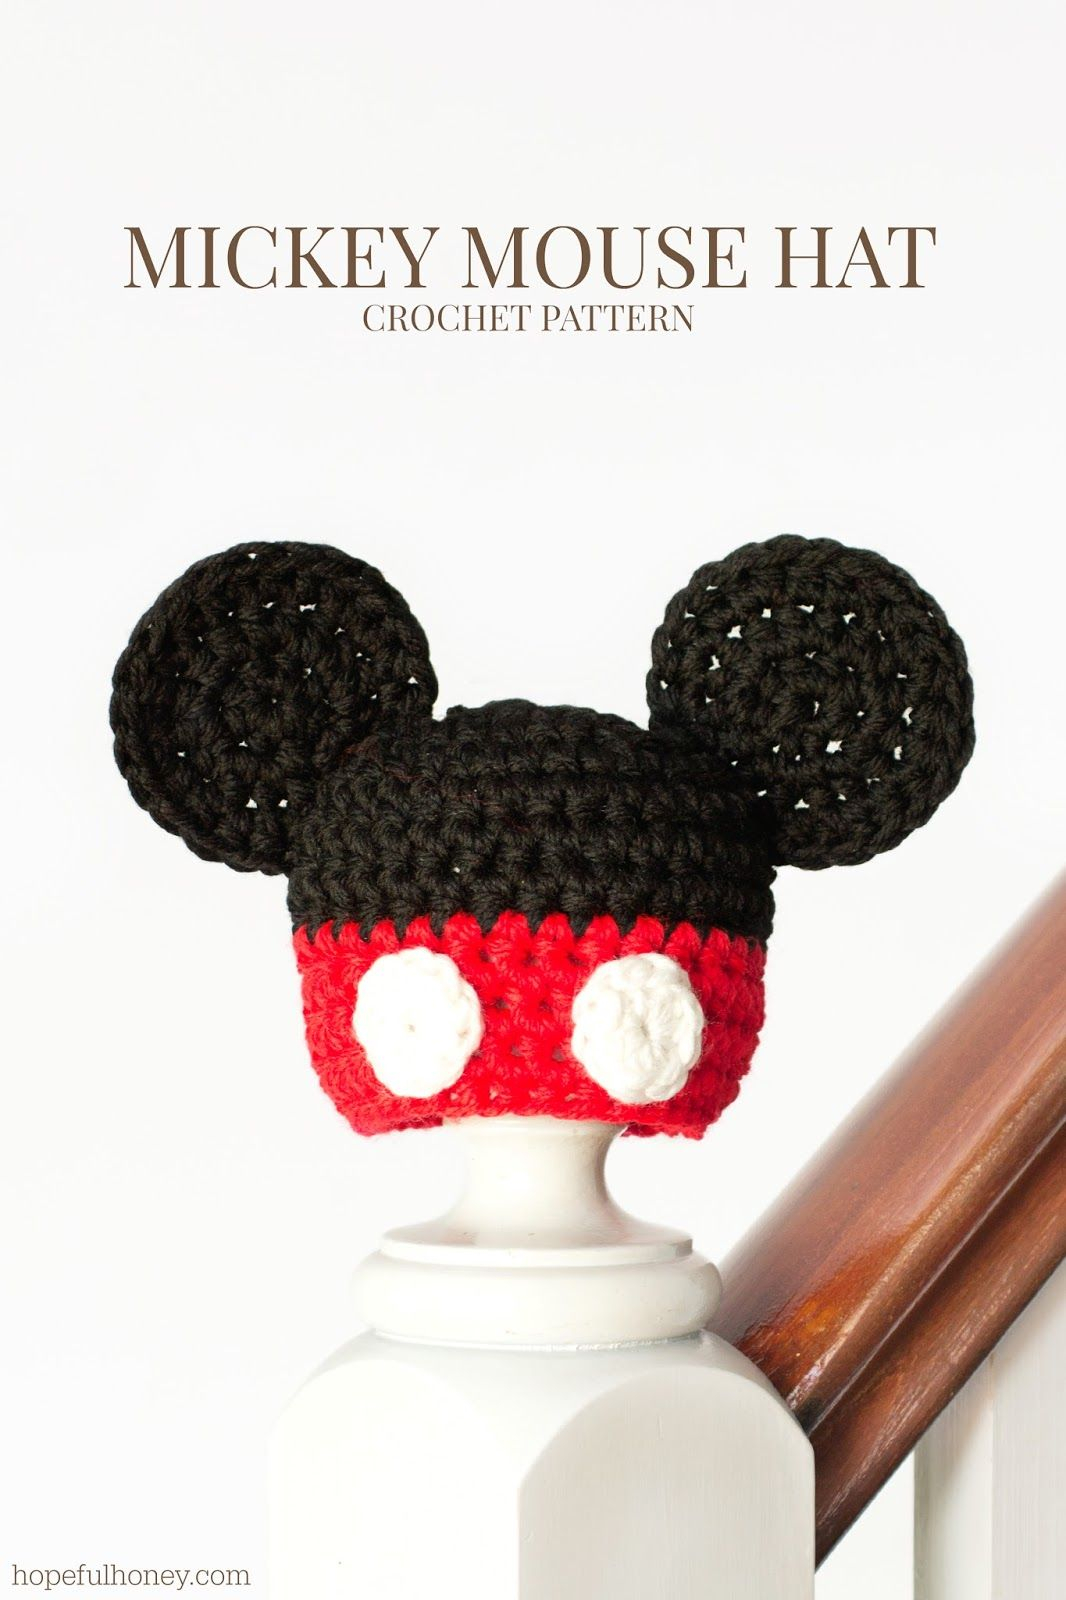 Free Crochet Pattern For Mickey Mouse Hat Newborn Mickey Mouse Inspired Hat Crochet Pattern Crochet Free